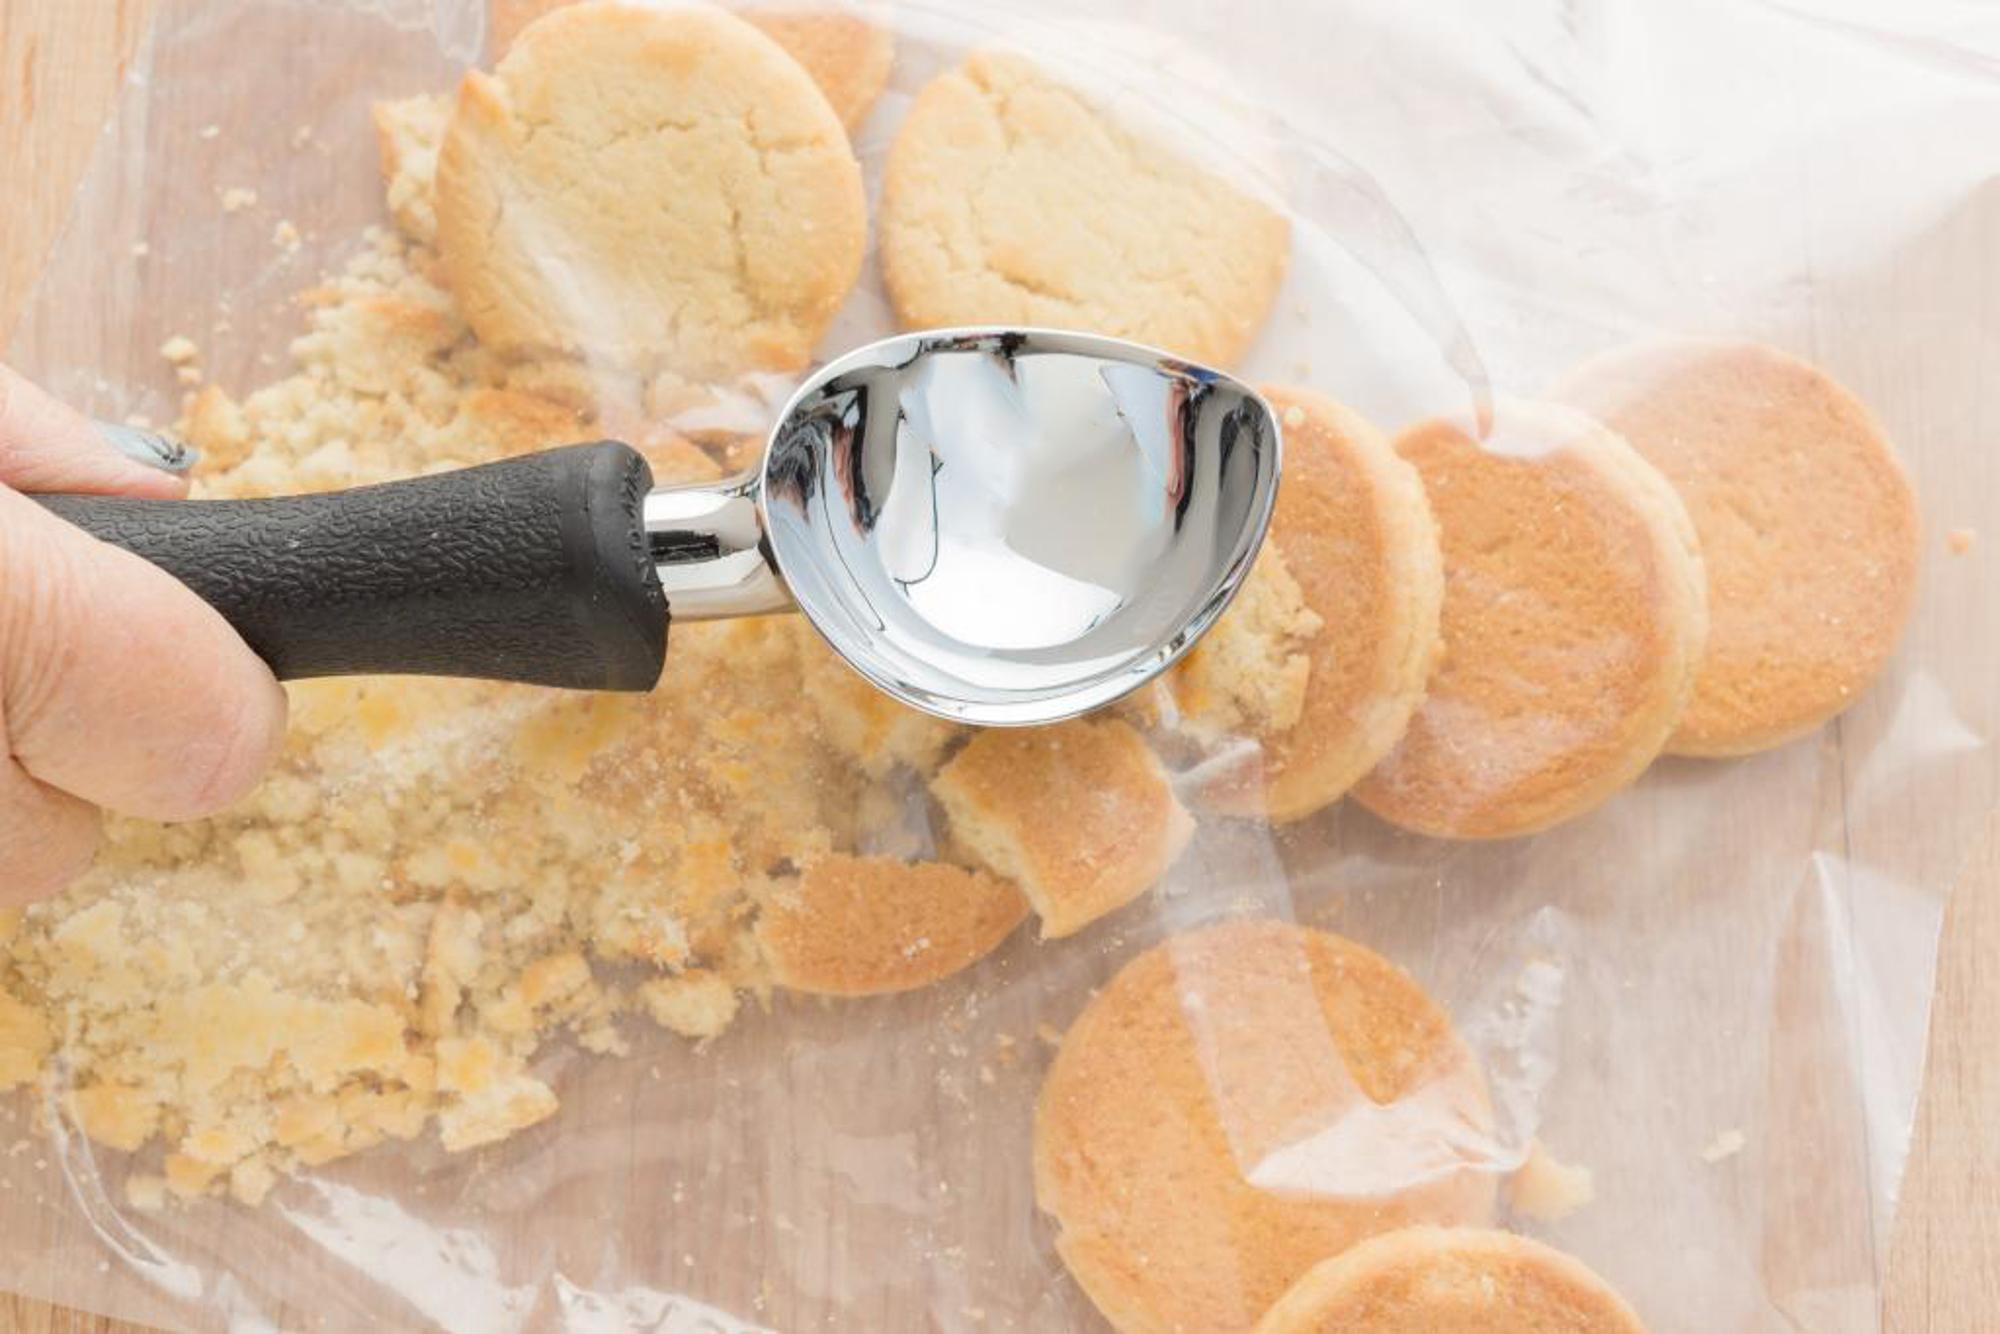 Crush the shortbread cookies with an Ice Cream Scoop.